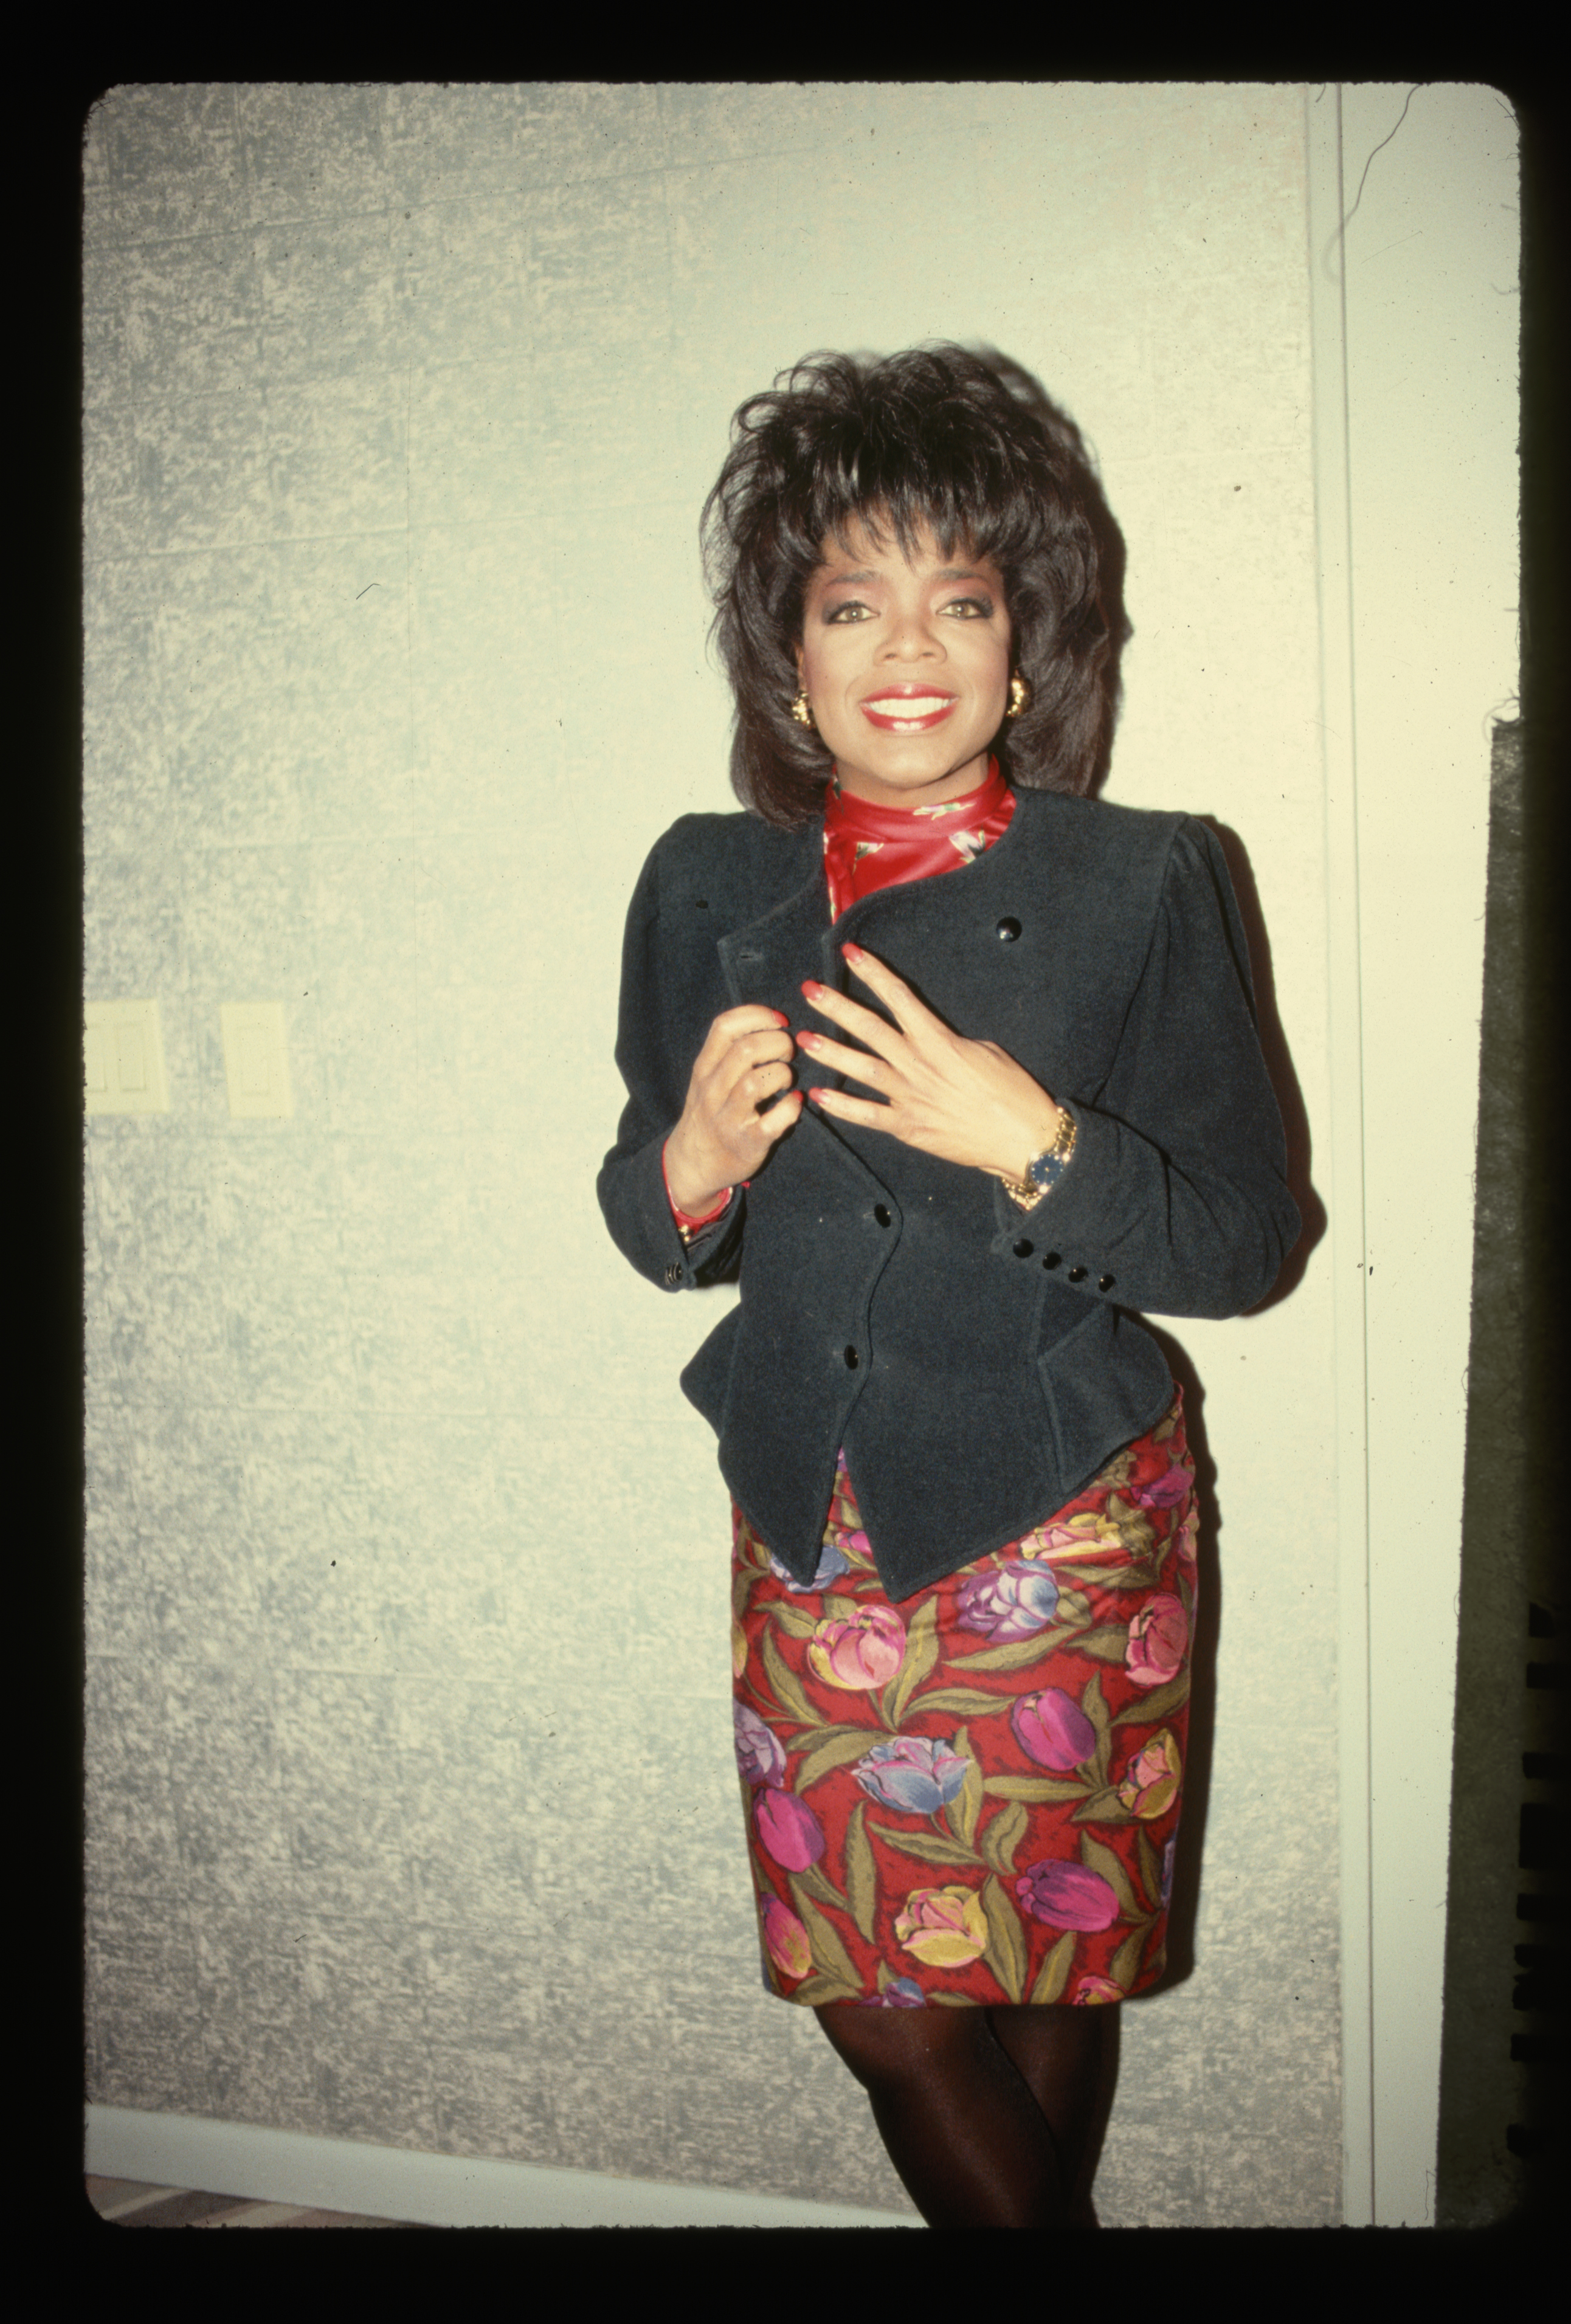 Oprah Winfrey posing for a photograph in 1989 | Source: Getty Images